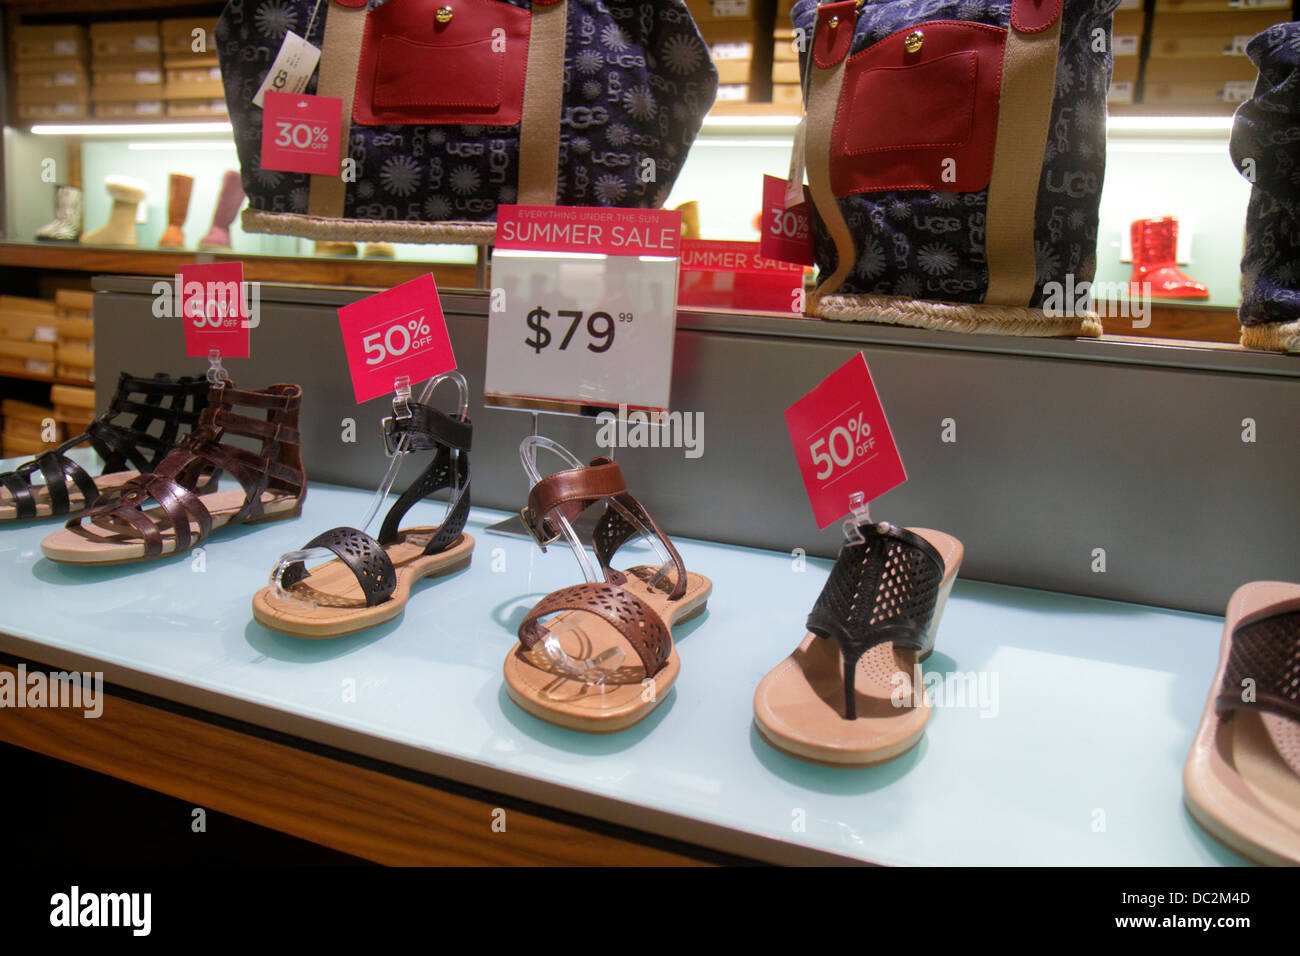 Florida Sunrise,Fort Ft. Lauderdale,Sawgrass Mills mall,interior  inside,sale,UGG,women's,shoes,sign,50% discount off,reduced  pricing,price,discount,re Stock Photo - Alamy